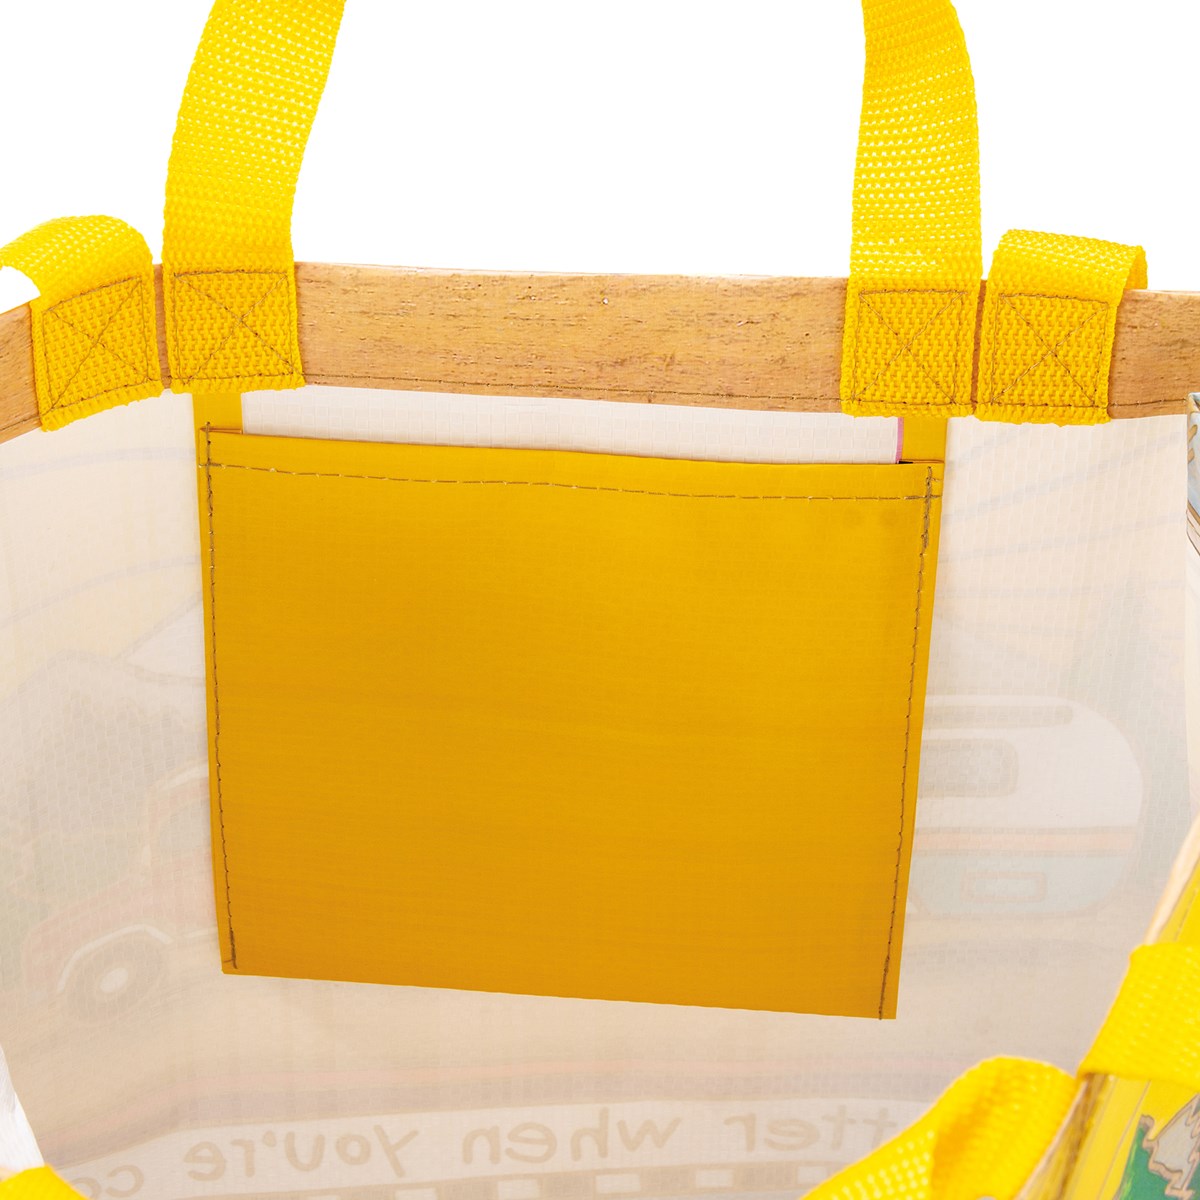 Market Tote - Life Is Better When You're Camping - 15.50" x 15.25" x 6" - Post-Consumer Material, Nylon